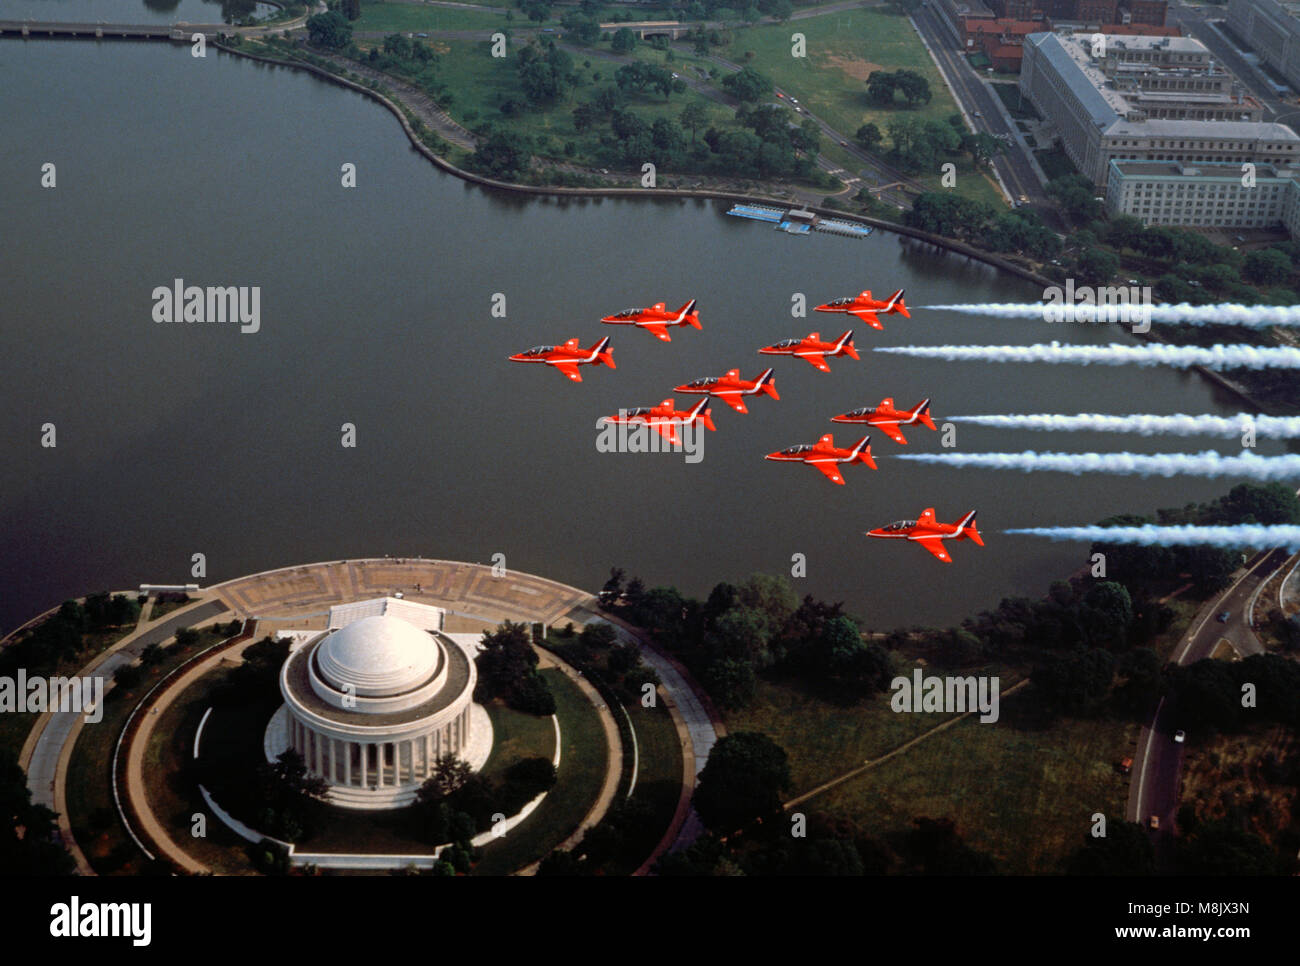 The Red Arrows  ( the Aerobatic display team of the Royal Air Force) overflying the Jefferson Memorial, Washington D.C. USA Stock Photo